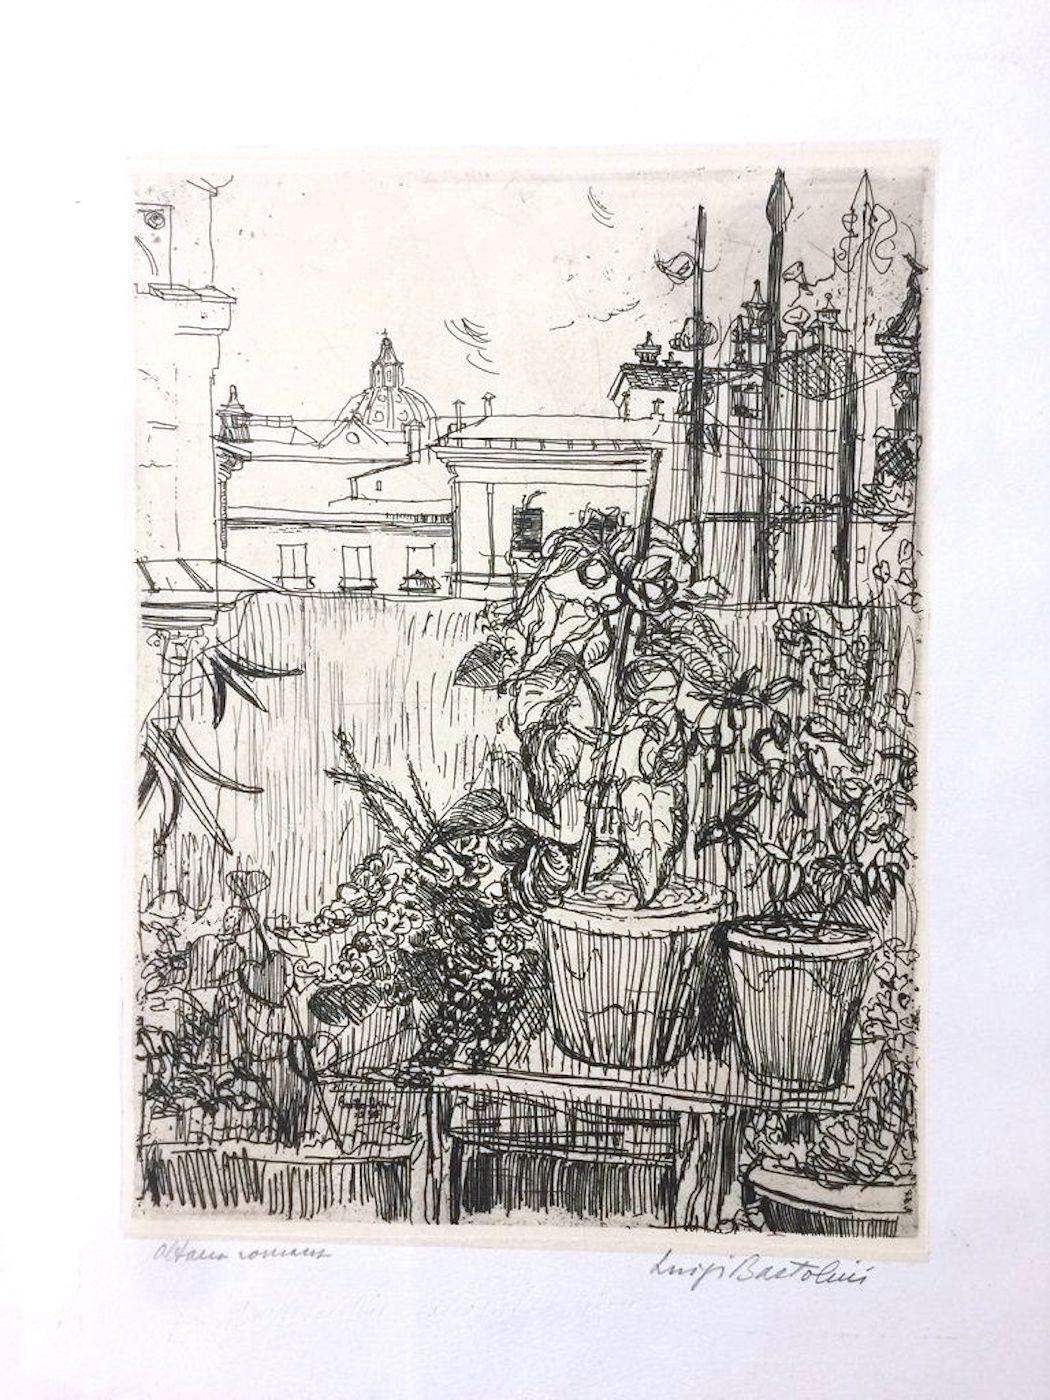 Image dimensions: 33.4 x 24.4 cm.

Altana Romana (Roman Roof Terrace) is an original masterpiece realized by the great Italian artist, poet, and engraver Luigi Bartolini in 1954.

Original etching applied on China paper.

Titled in pencil on the